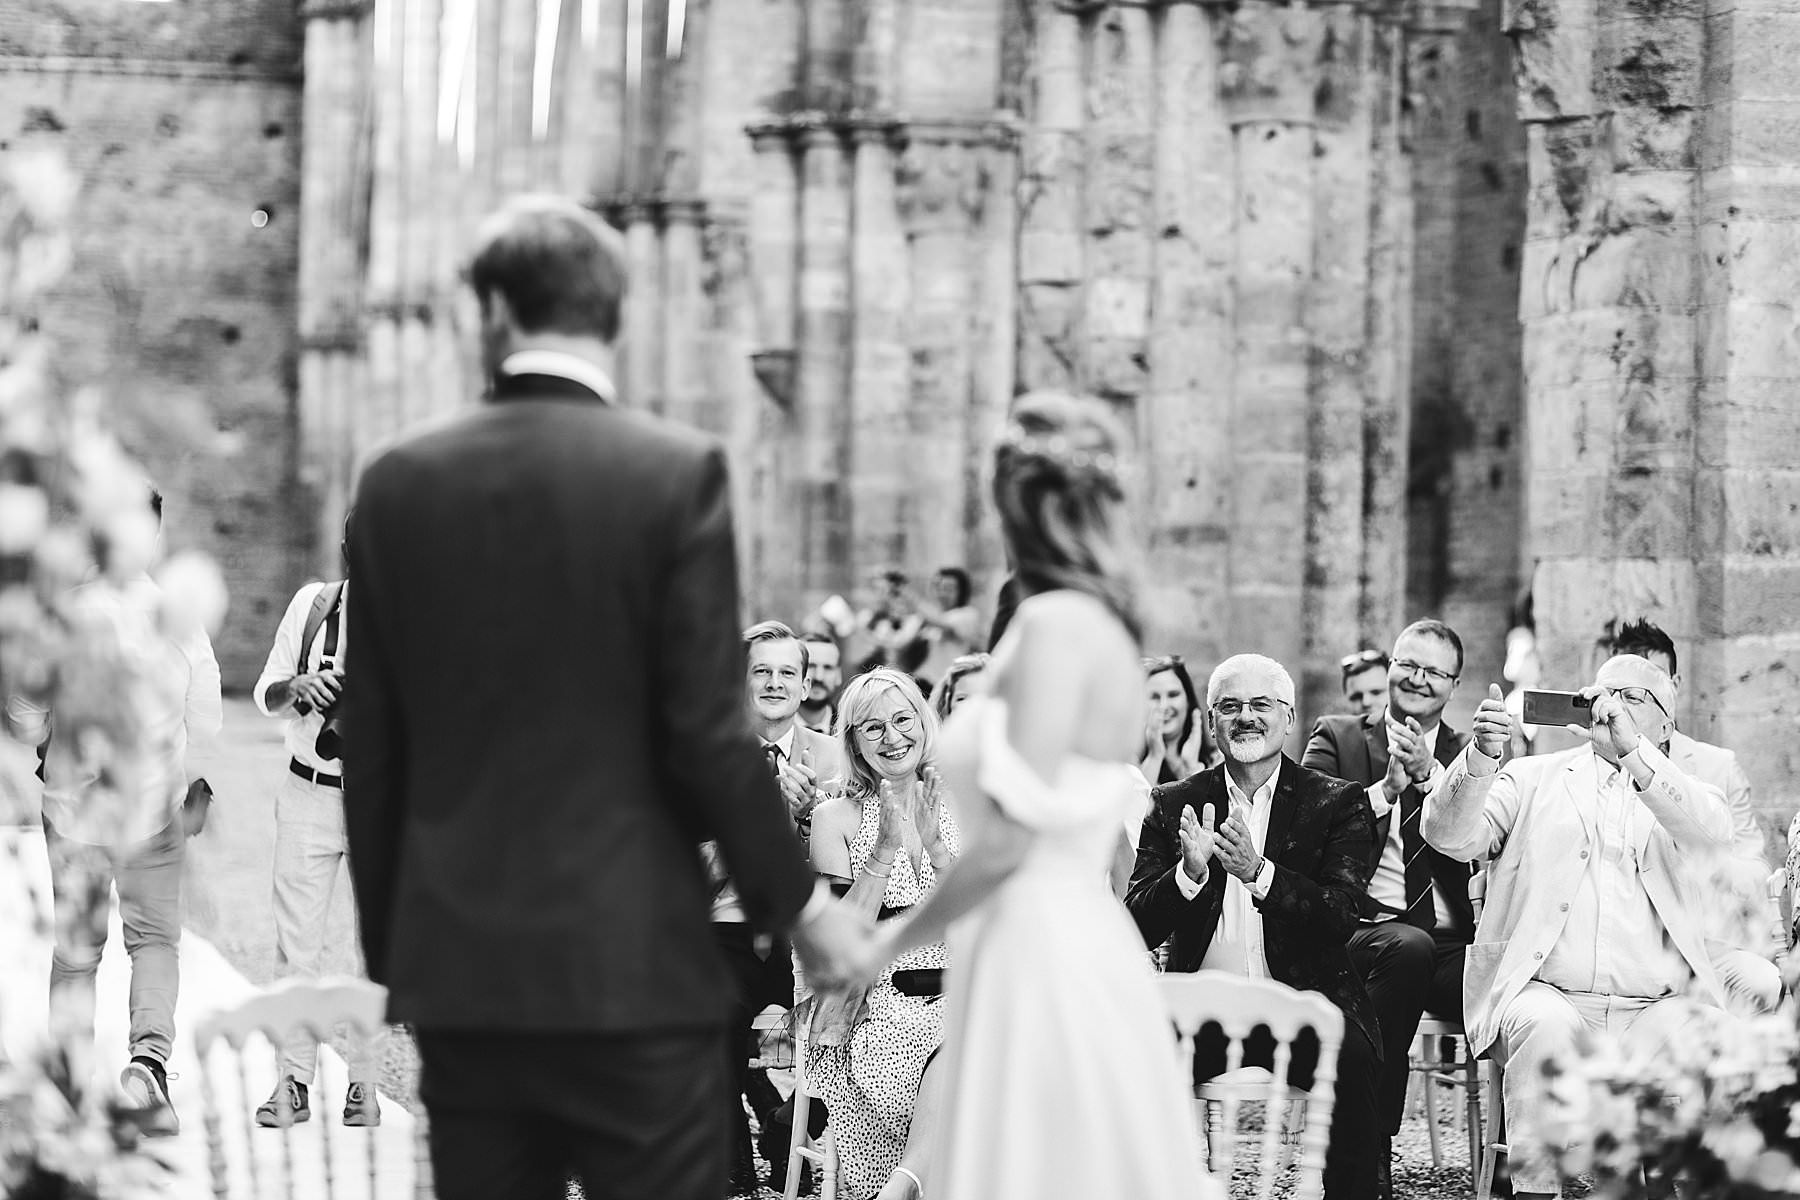 Reportage documentary wedding photography at Roofless Abbey of San Galgano in the countryside of Tuscany near Siena